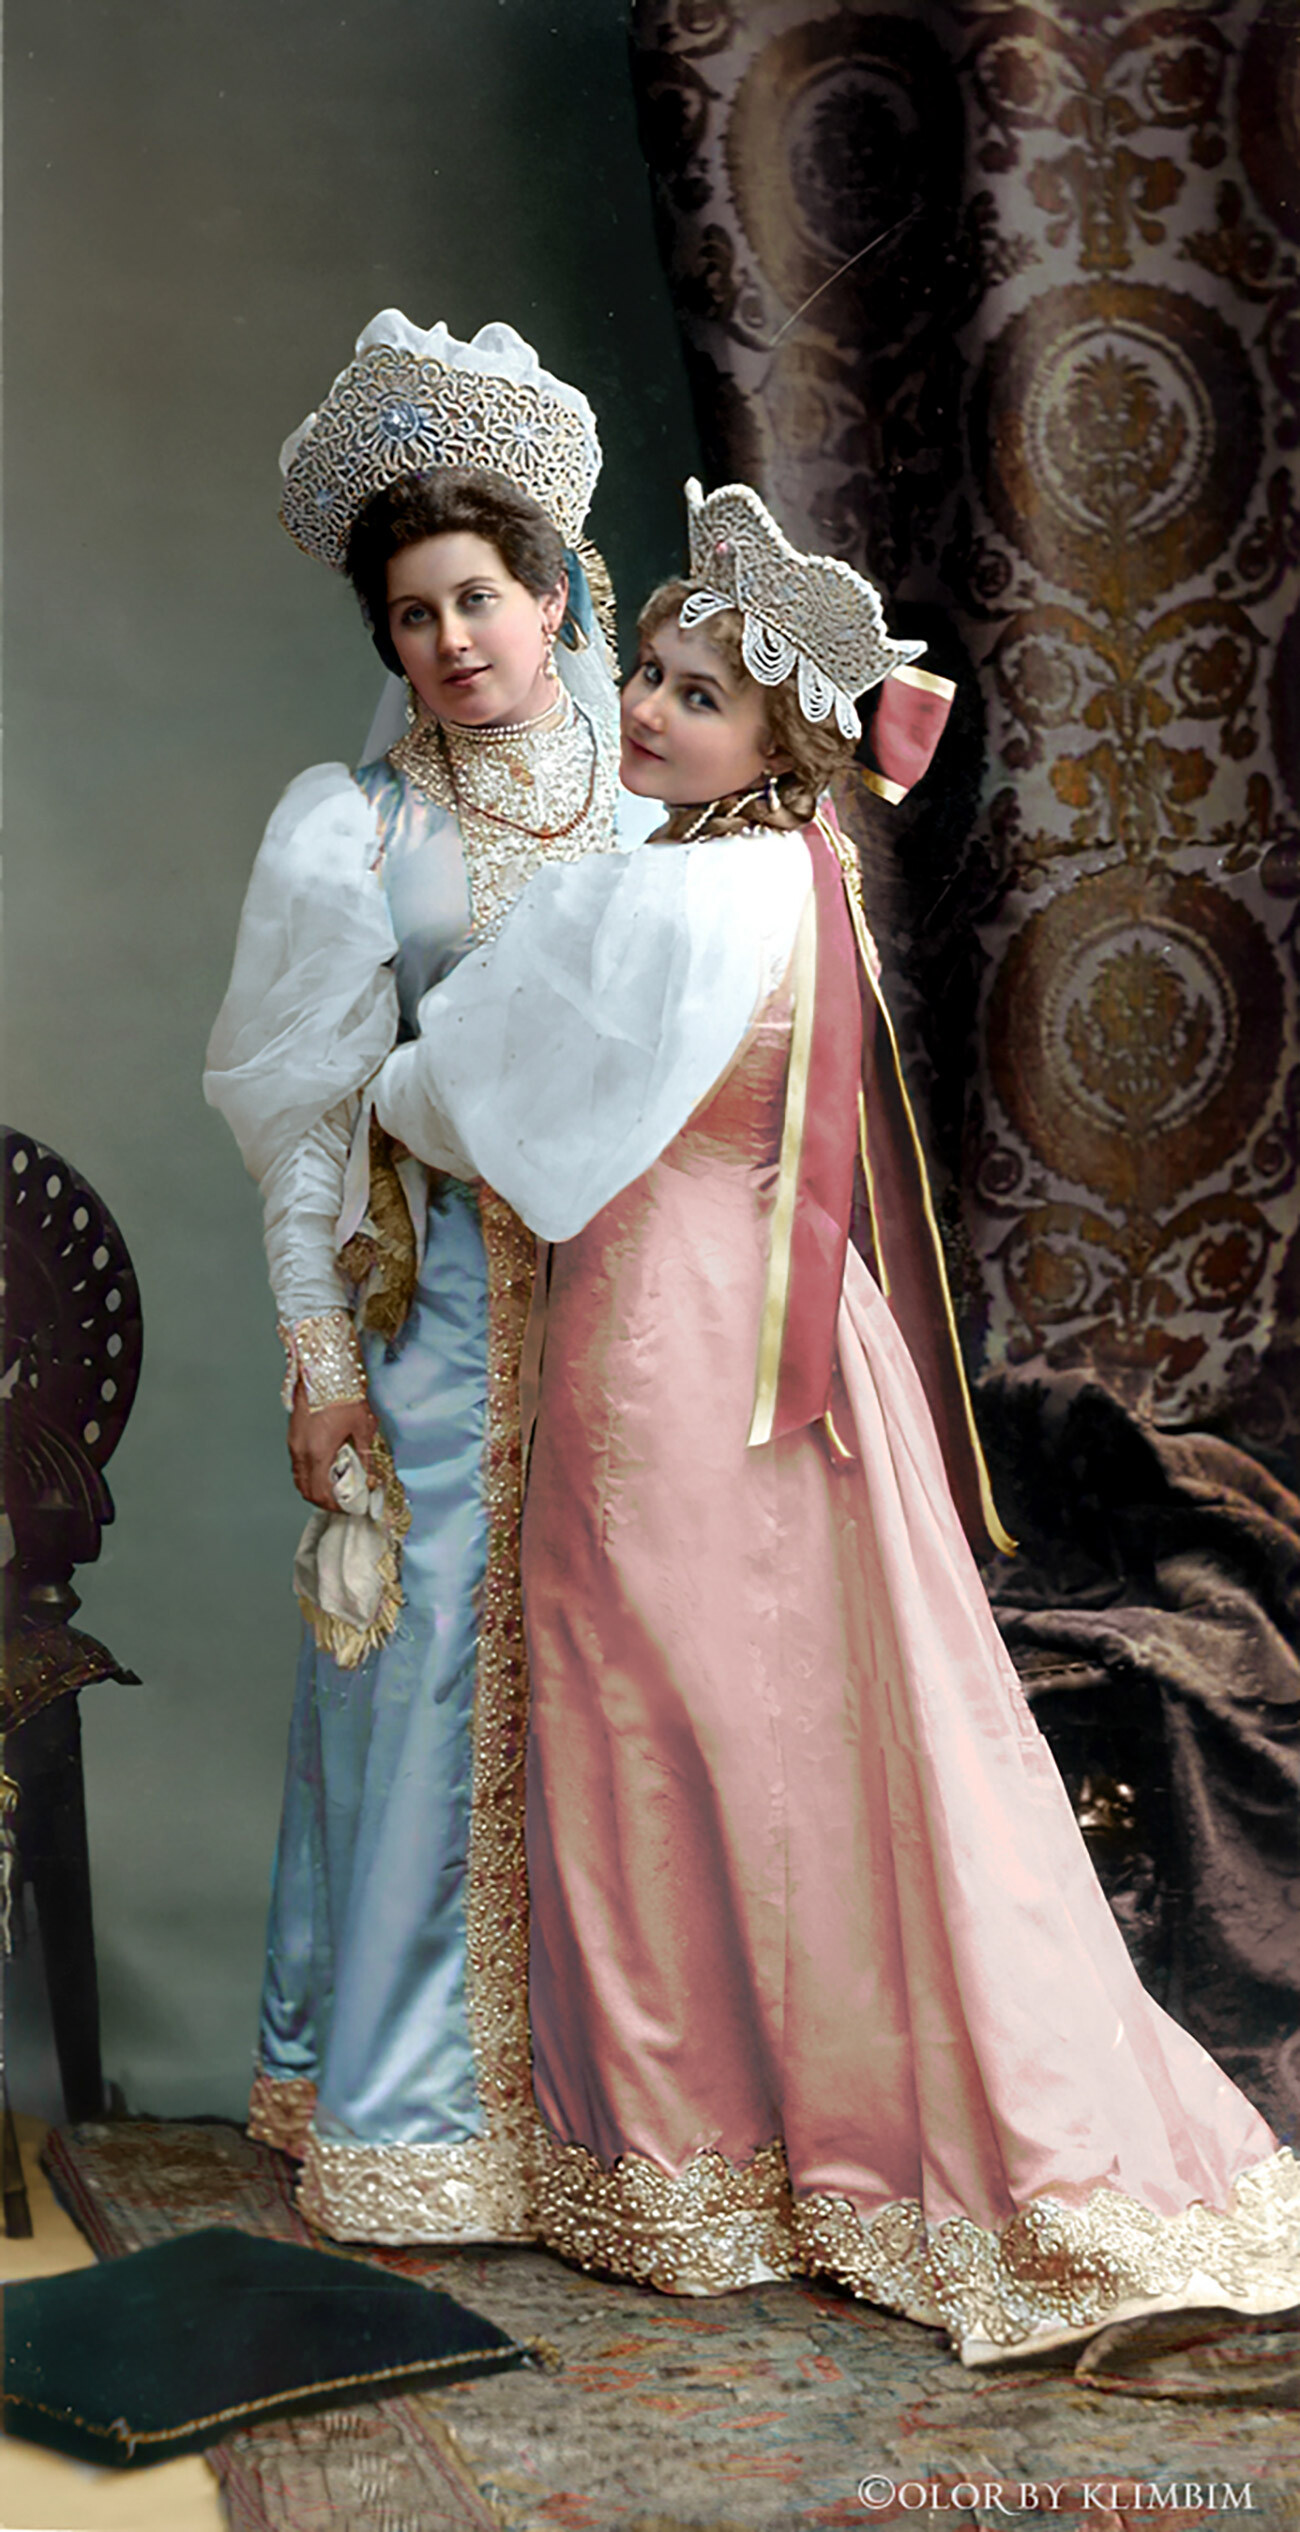 Lady-in-waiting Anna Taneeva with sister